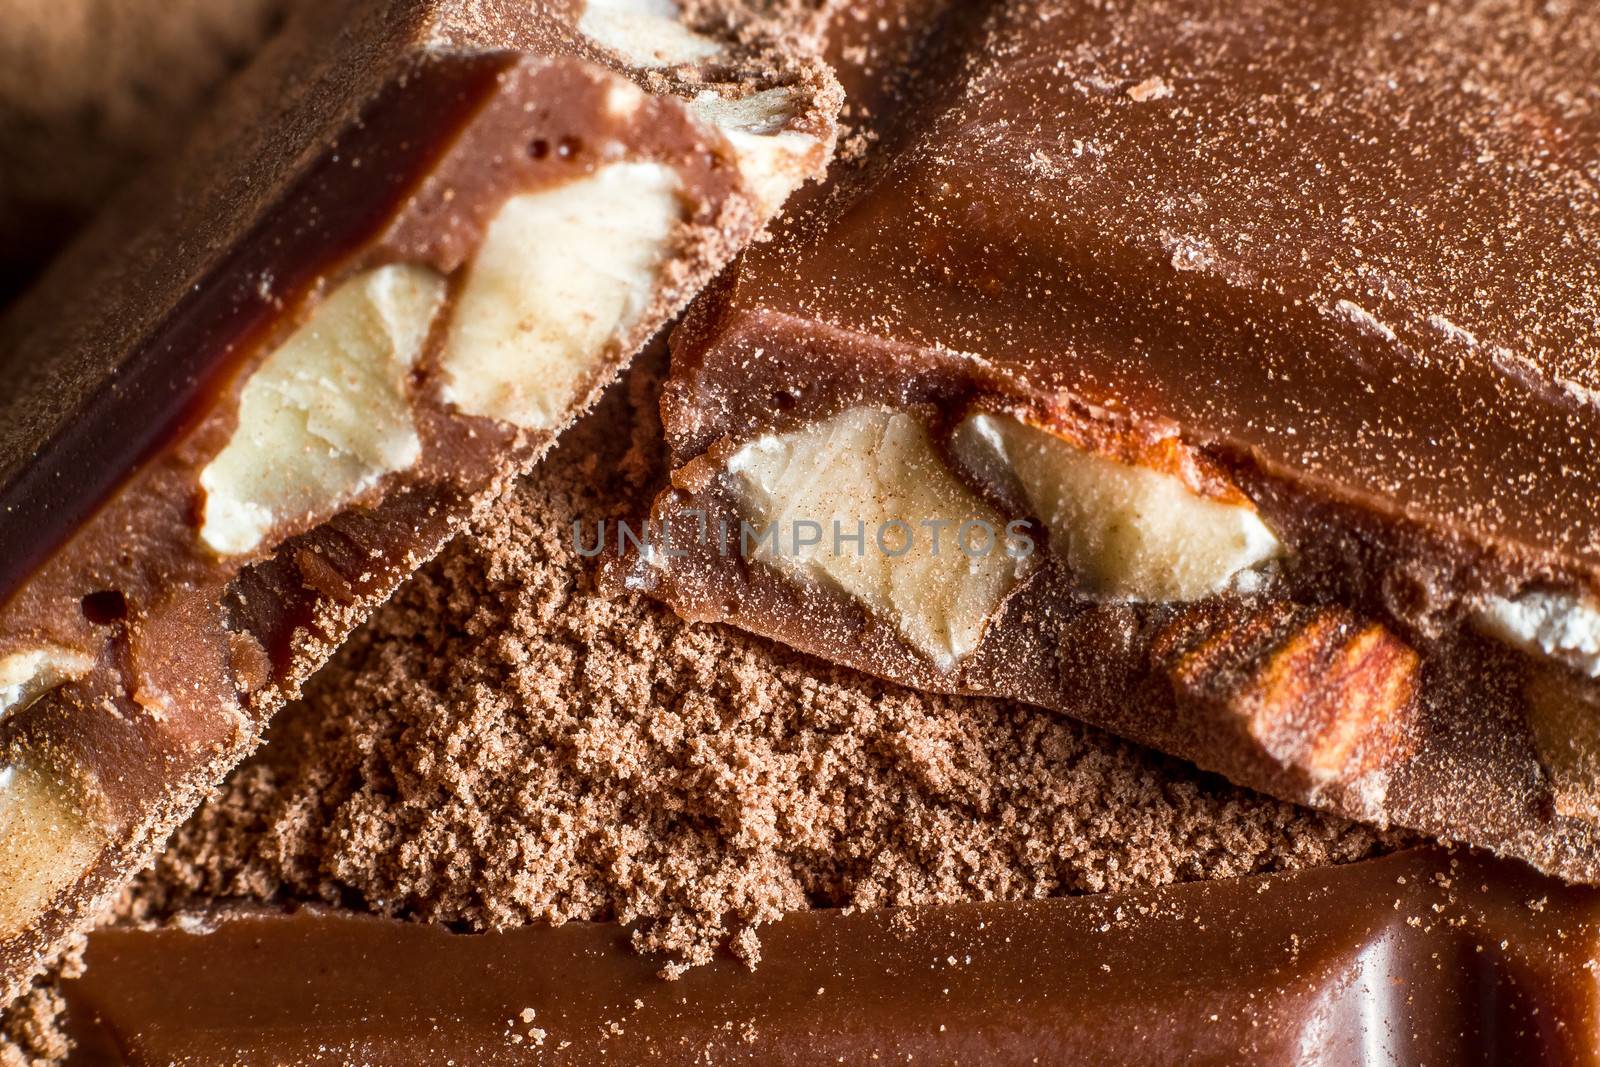 Chocolate tablet macro by dynamicfoto